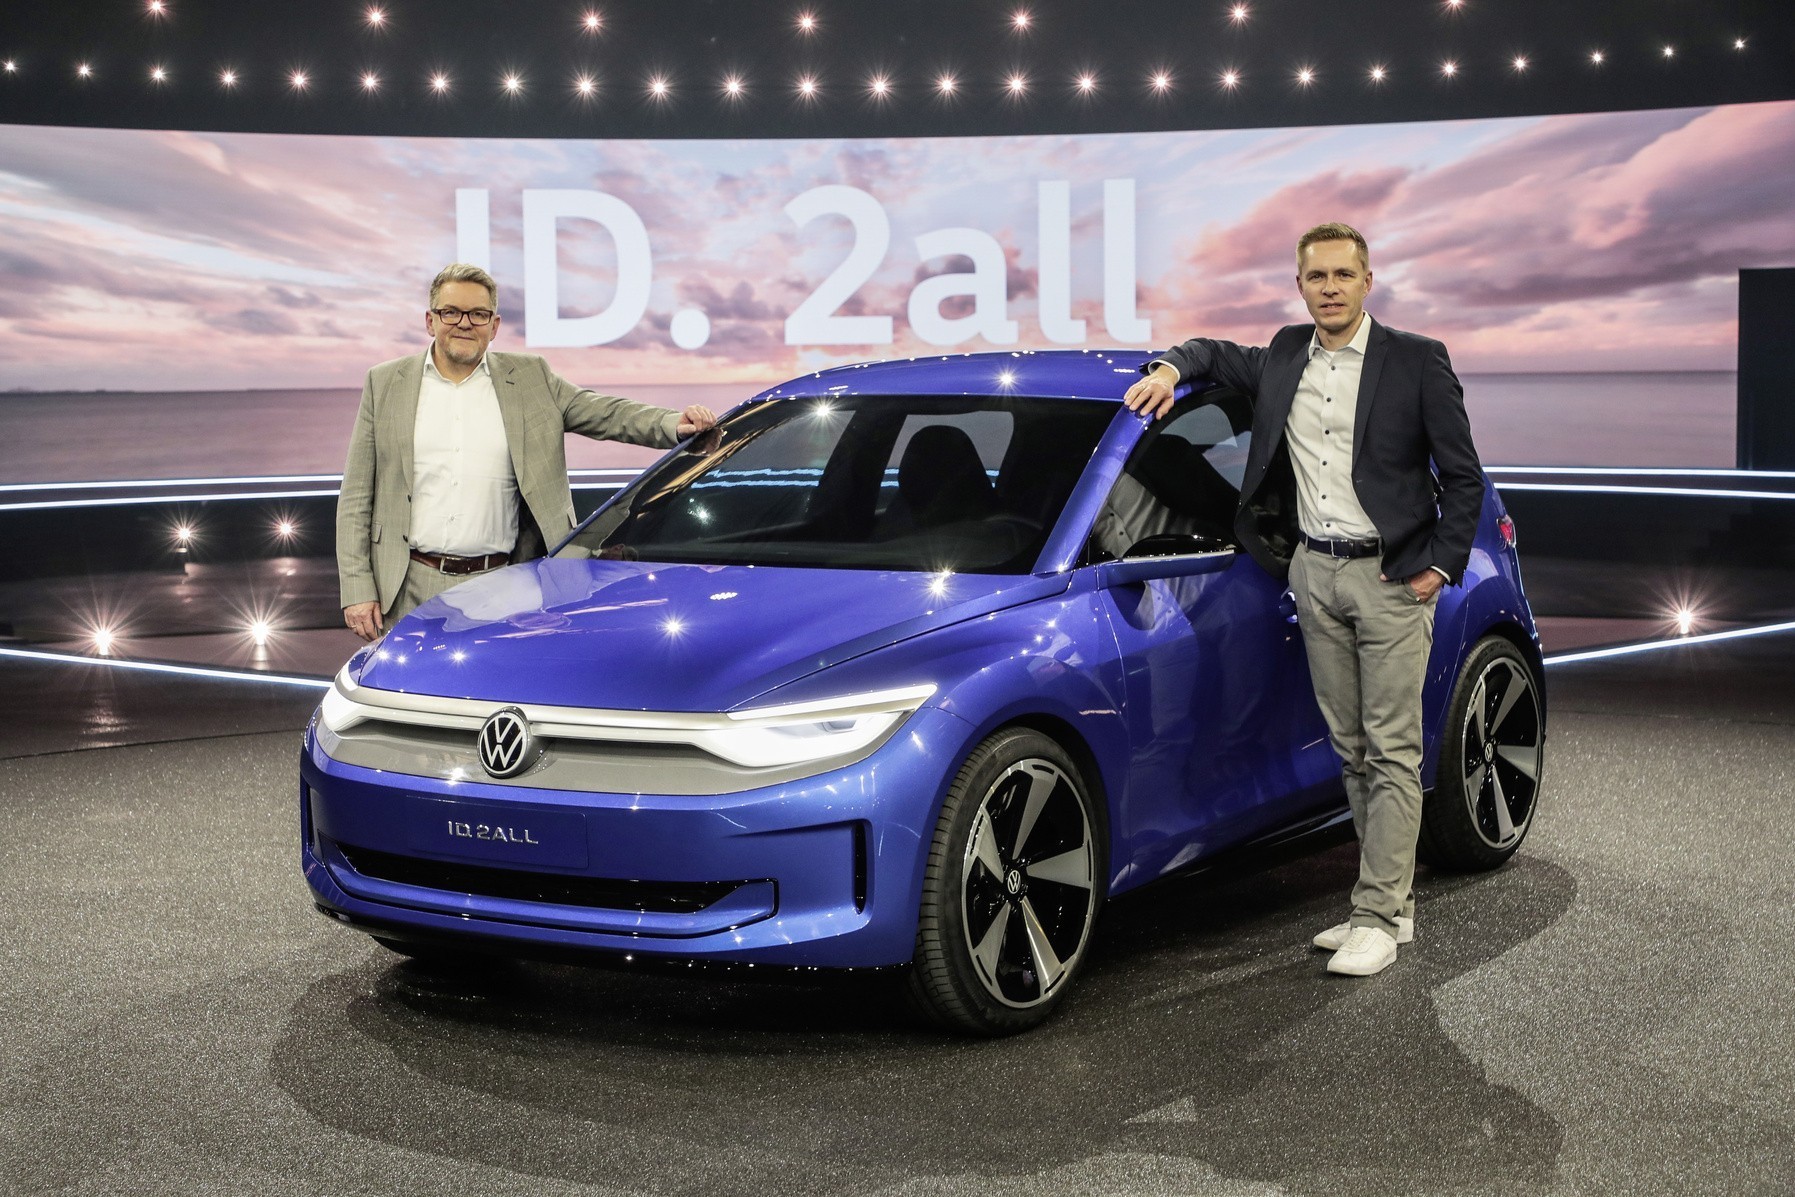 VW reduces electric car production and delays launch of an affordable model